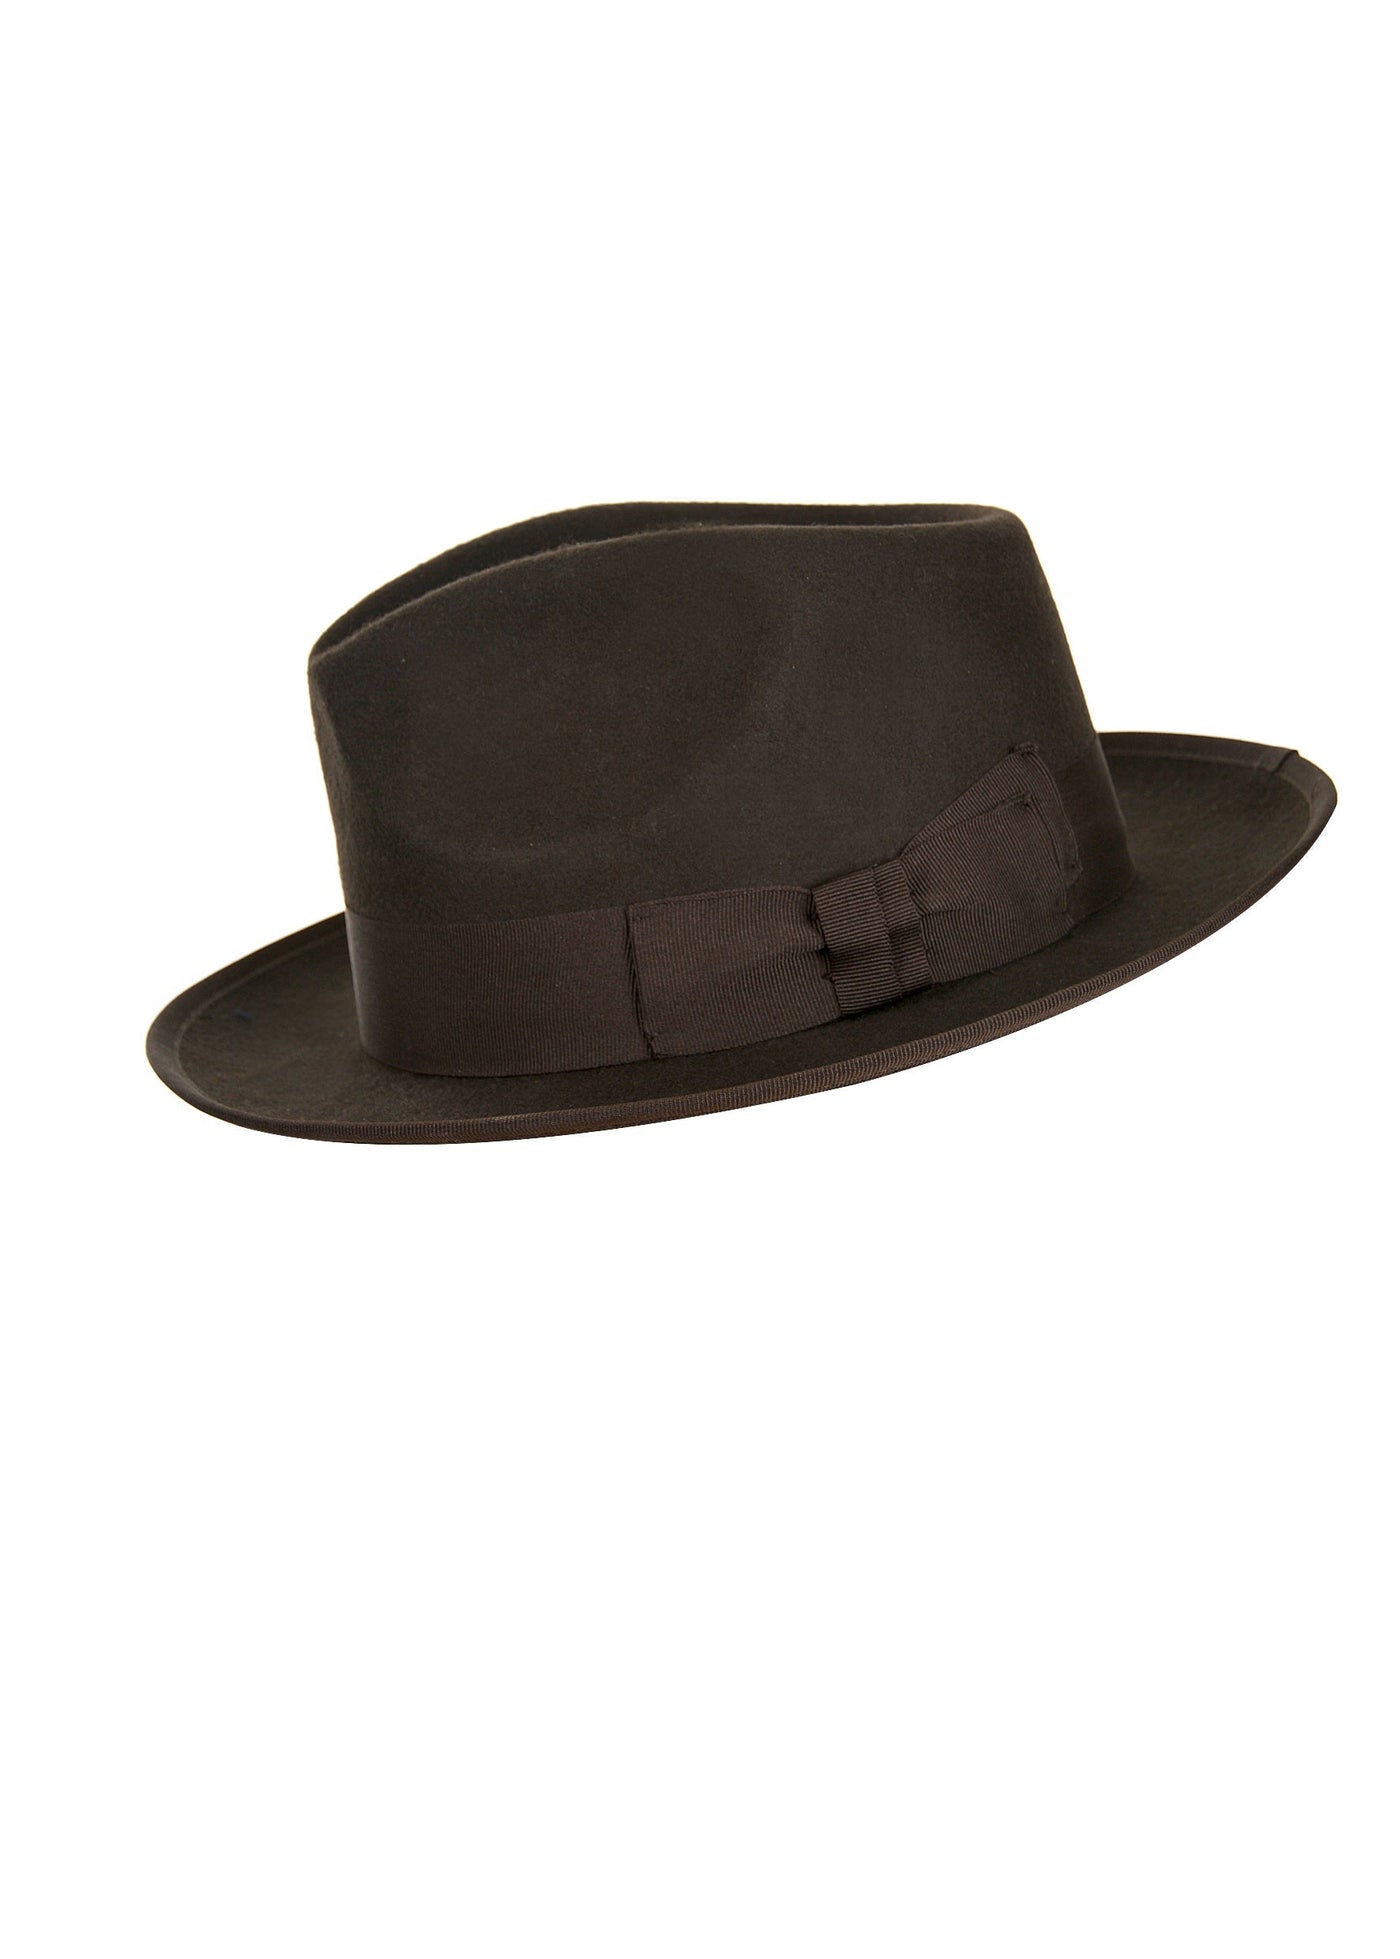 THOMAS COOK BOOTS AND CLOTHING HAT TCP1975HAT Draper Hat | Chocolate